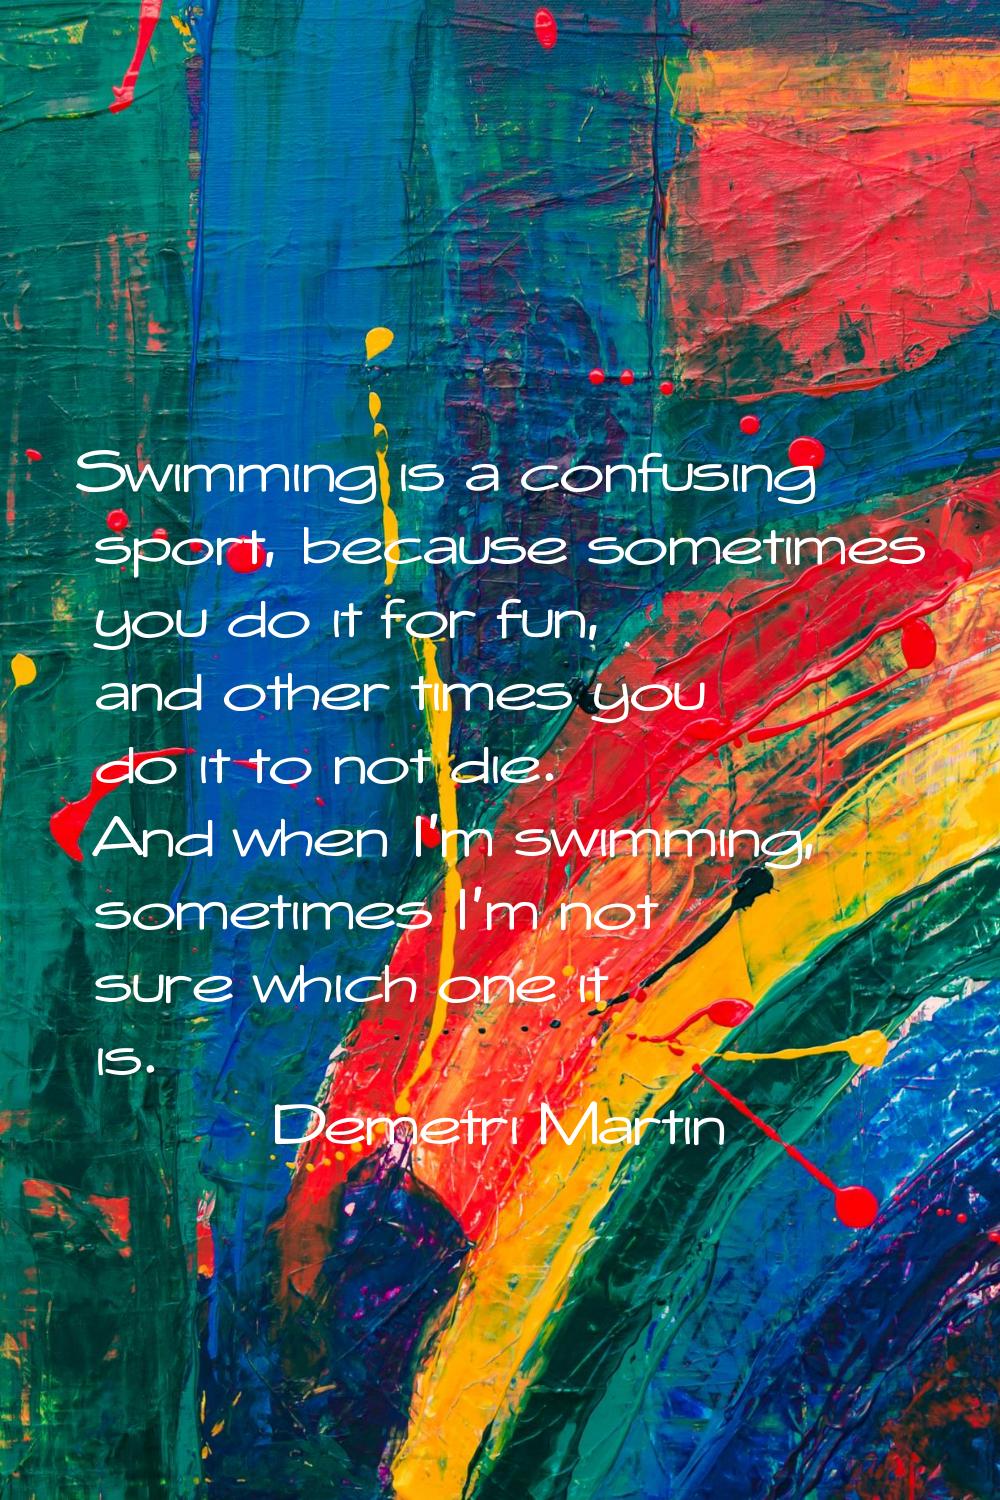 Swimming is a confusing sport, because sometimes you do it for fun, and other times you do it to no